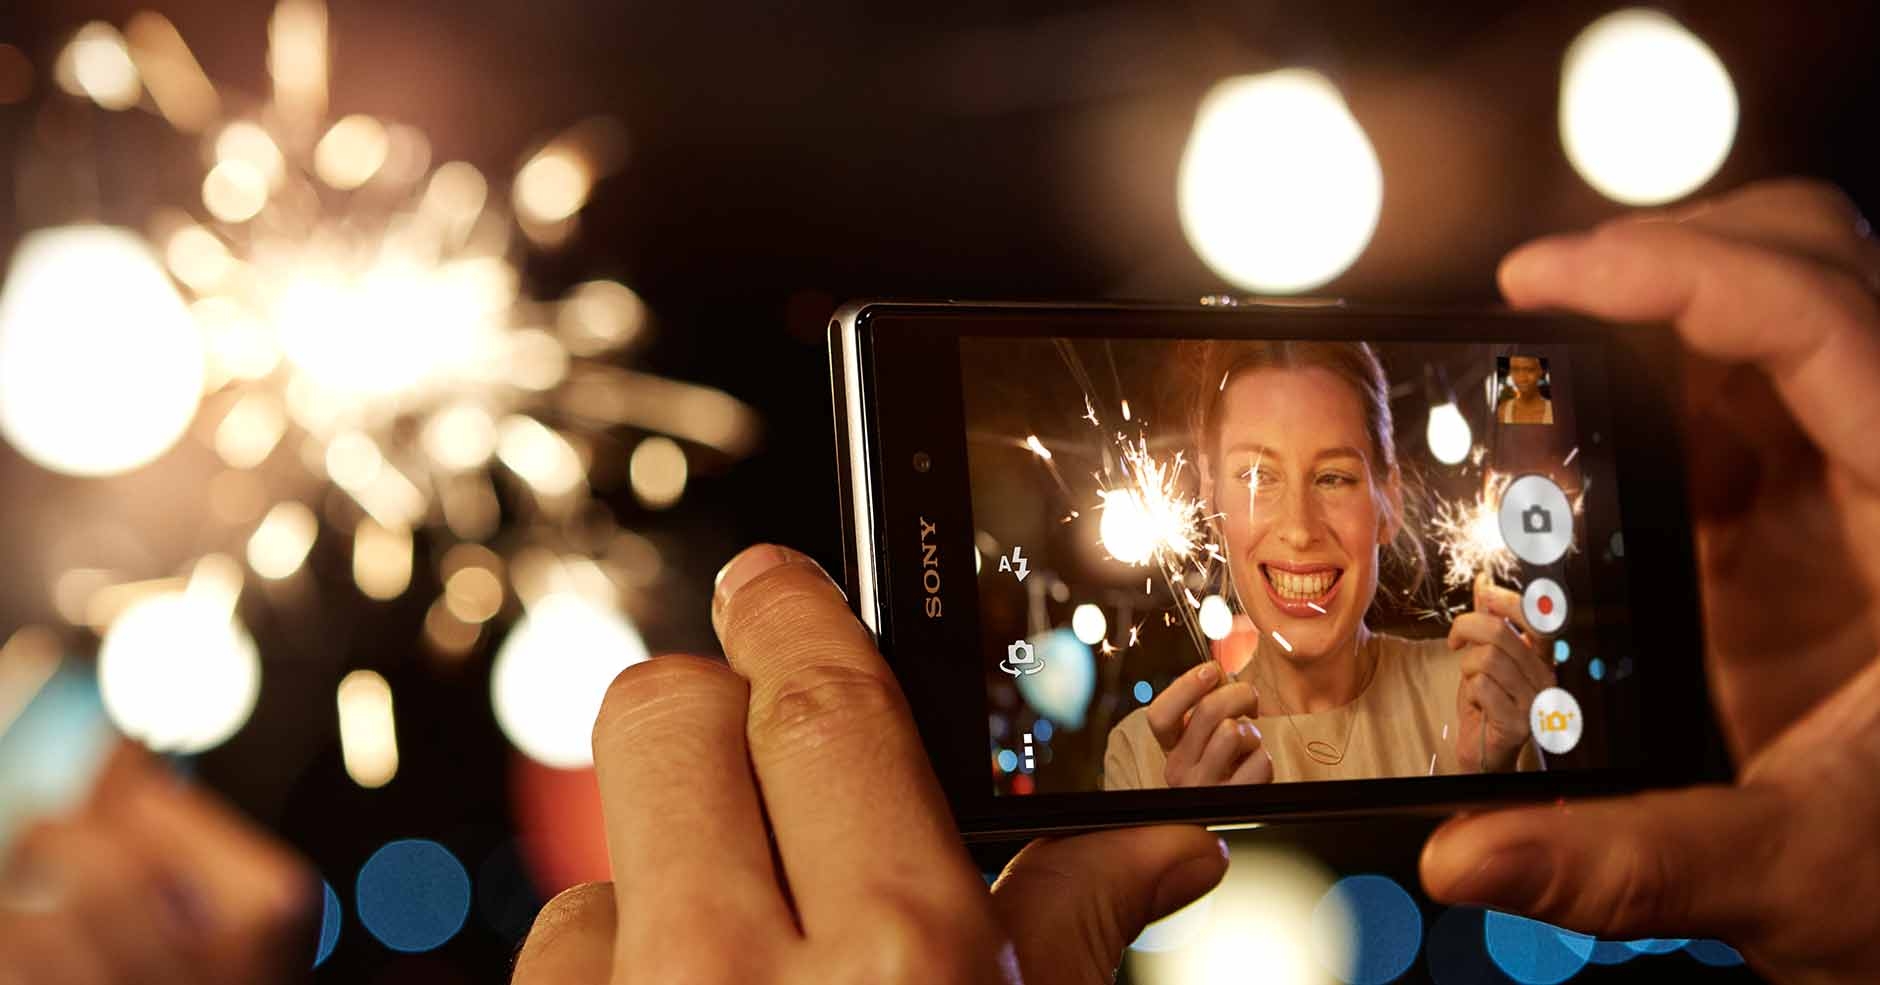 Capture the best blur-free images with the Xperia Z1 camera phone.